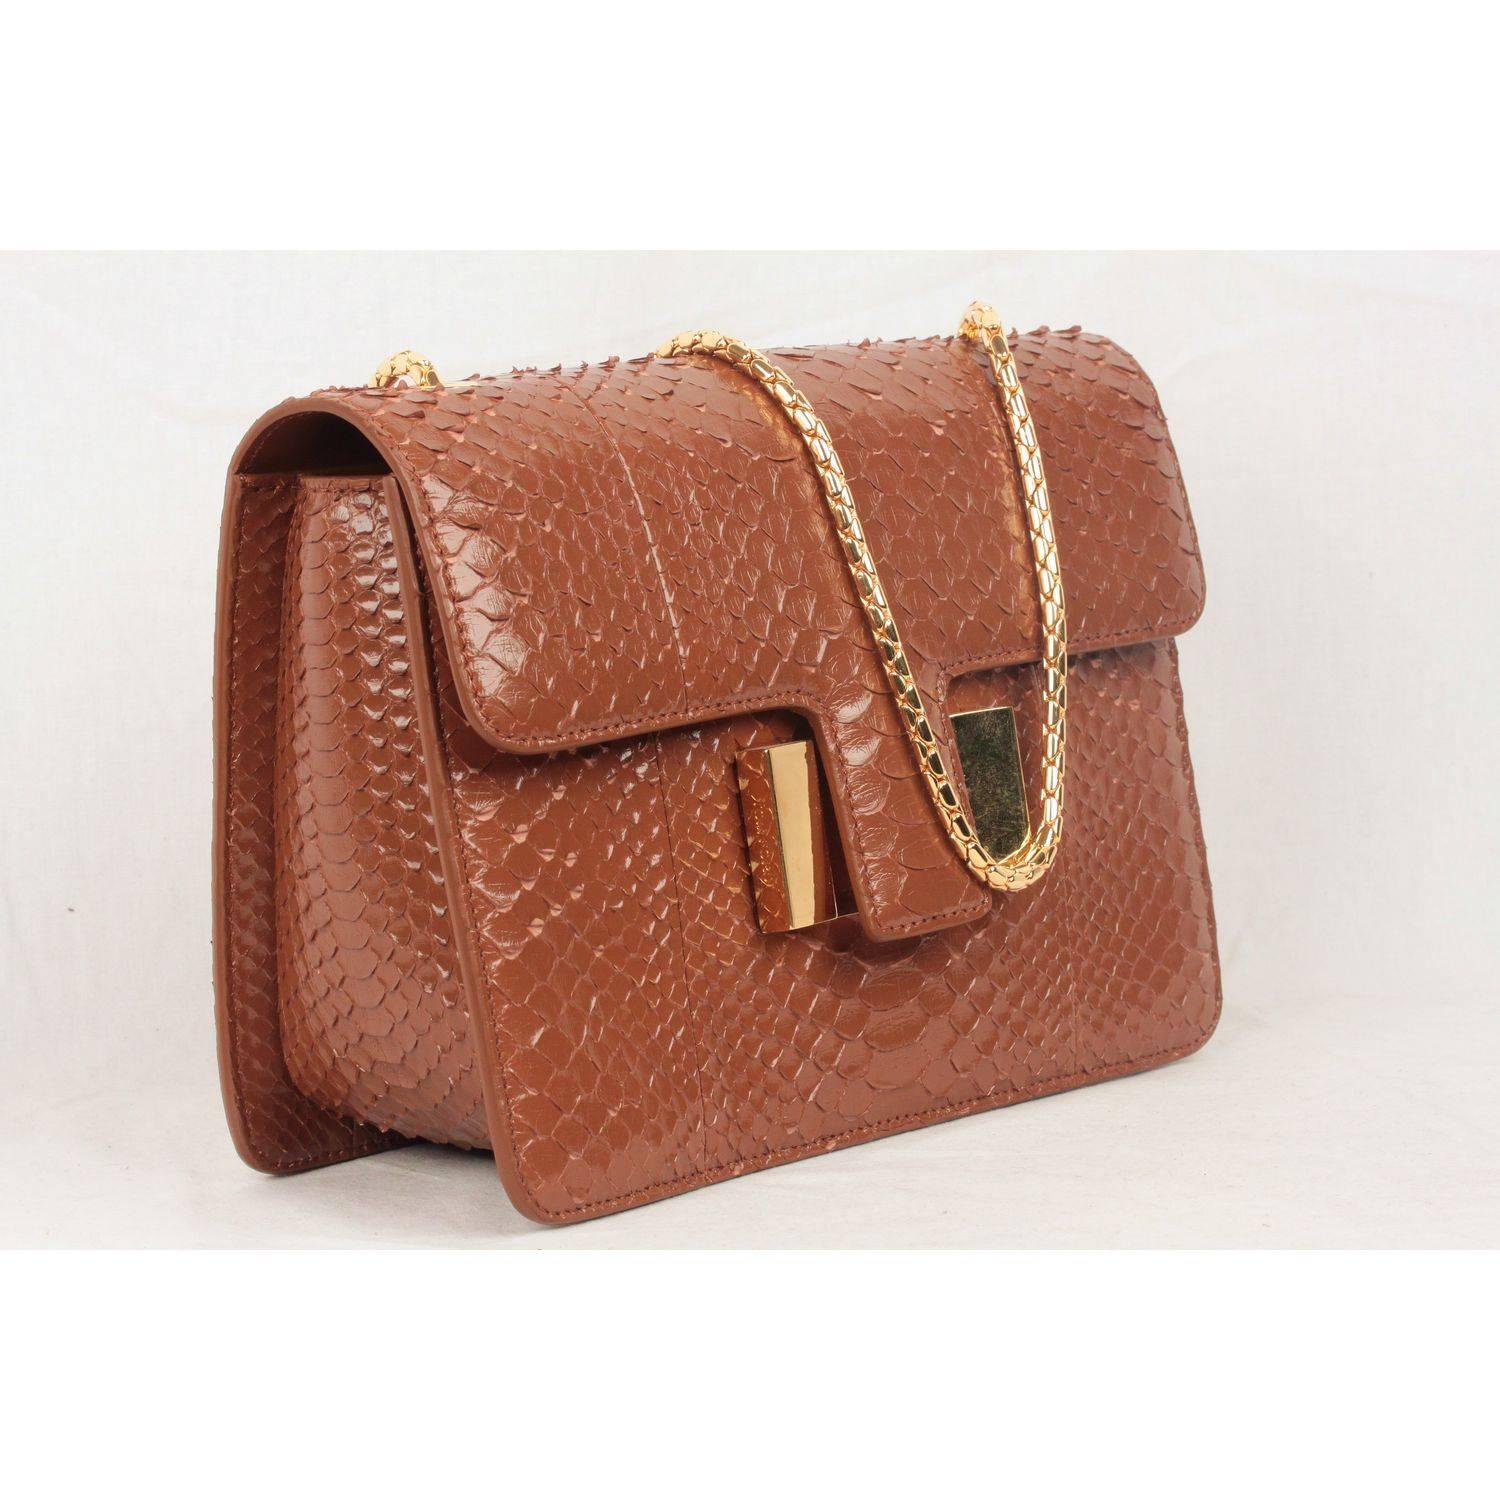 TOM FORD Tan Snakeskin SIENNA Structured Shoulder Bag In Excellent Condition In Rome, Rome